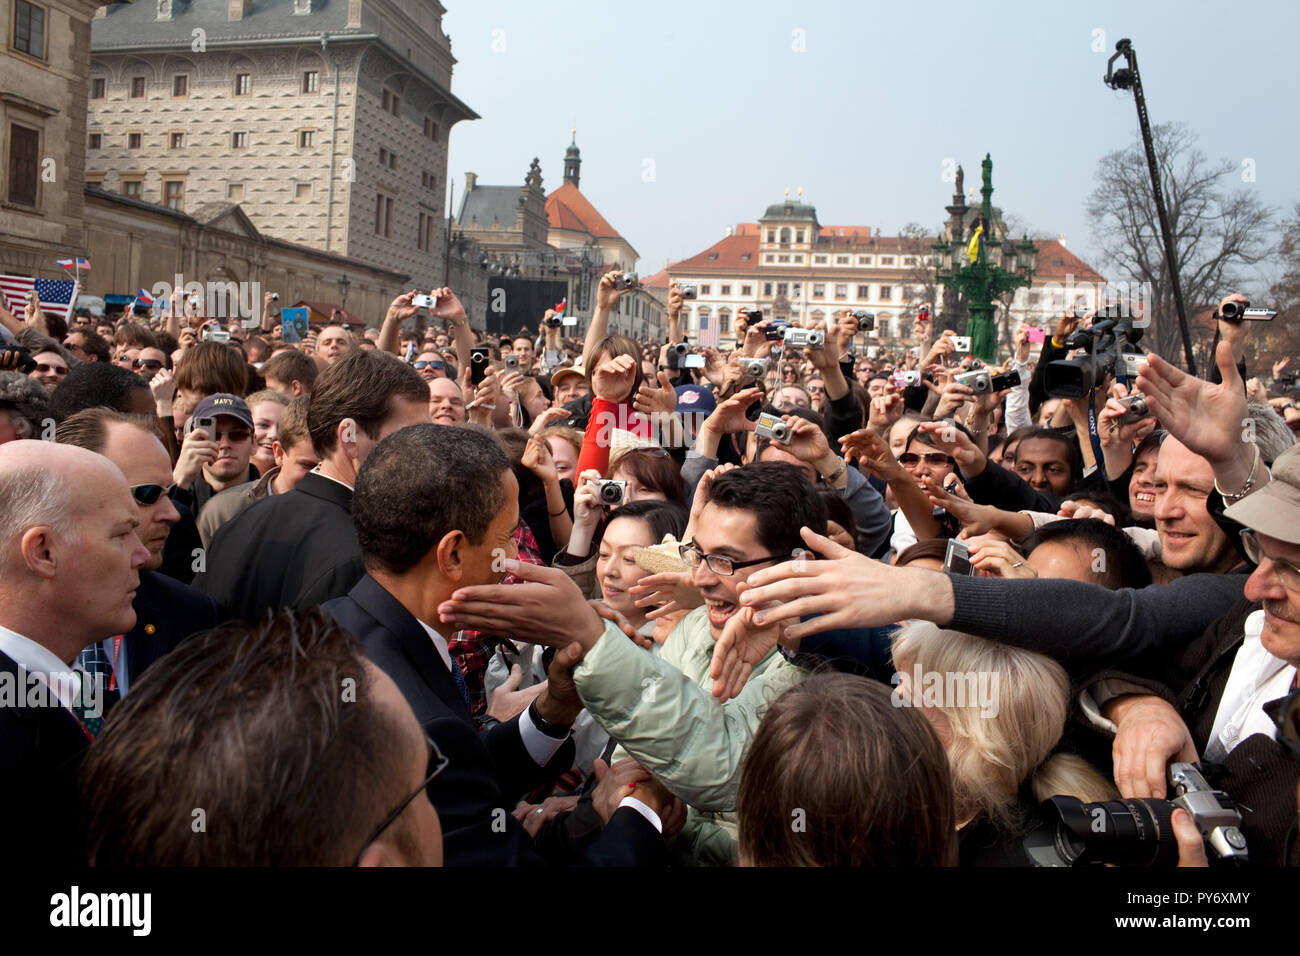 President Barack Obama is greeted by a large crowd following his Prague speech April 5, 2009, in Hradcany Square in Prague, Czech Republic. Official White House Photo by Pete Souza Stock Photo